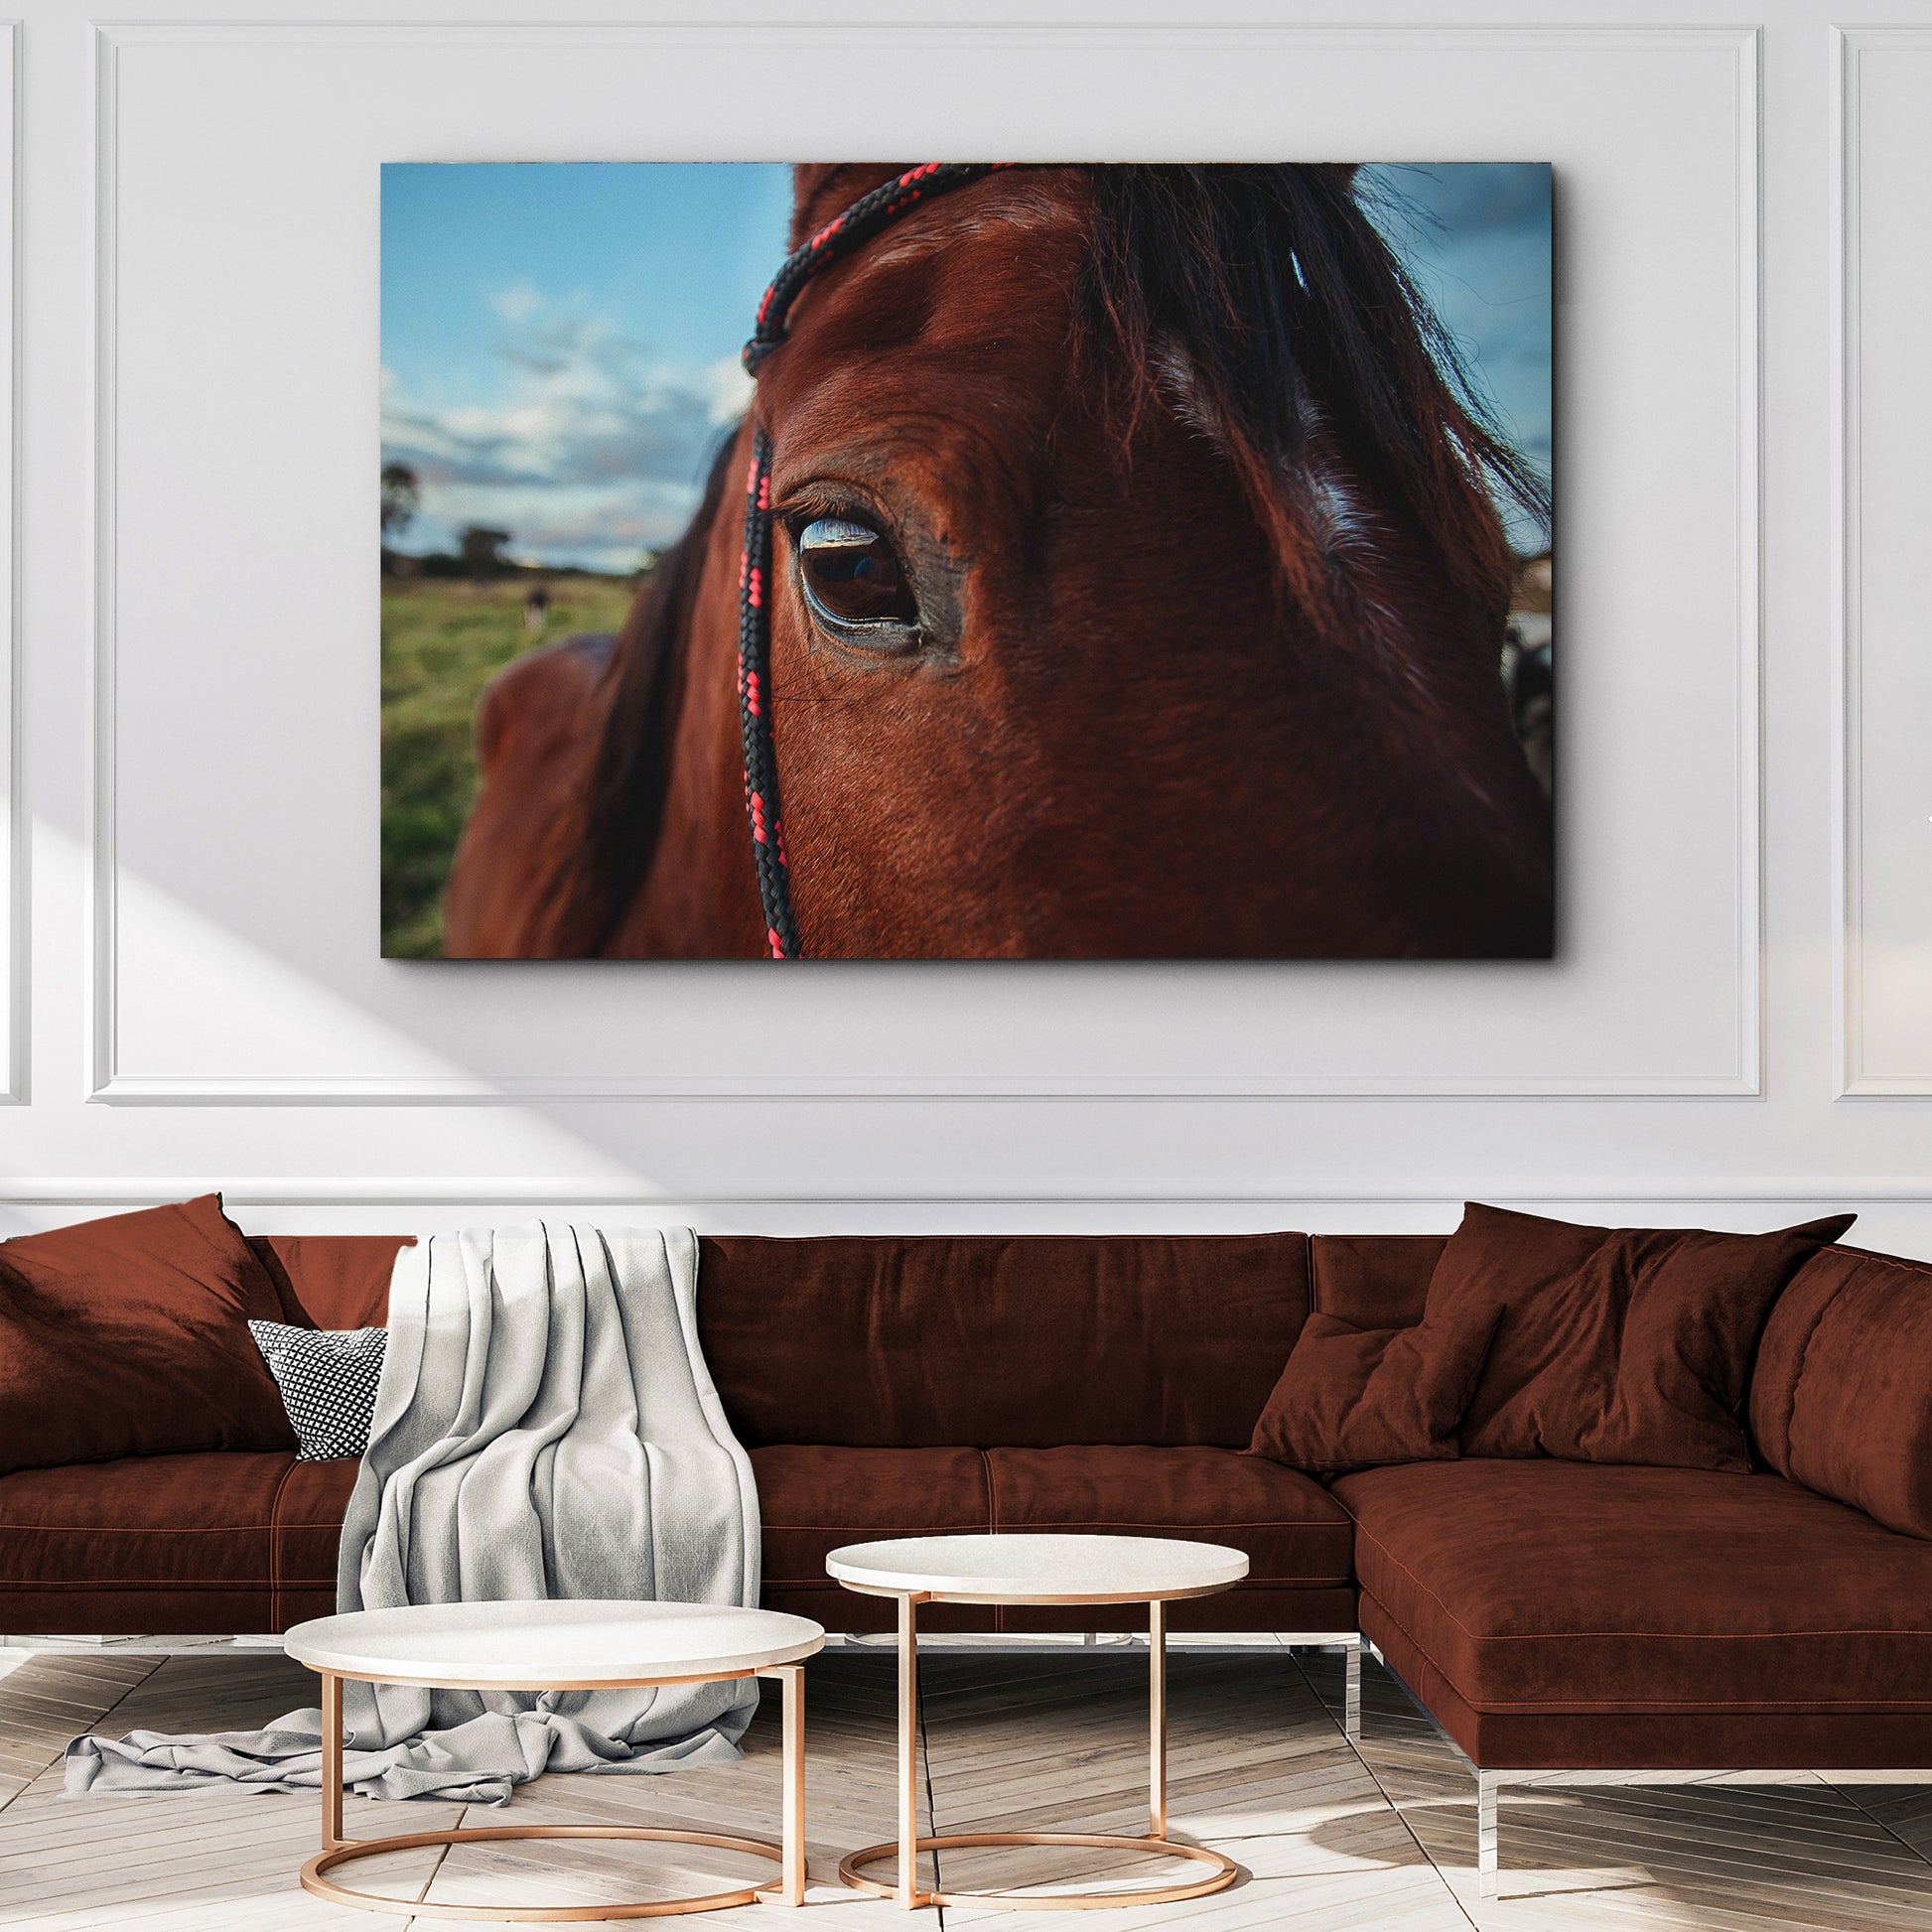 Horse Eye Canvas Wall Art Style 2 - Image by Tailored Canvases